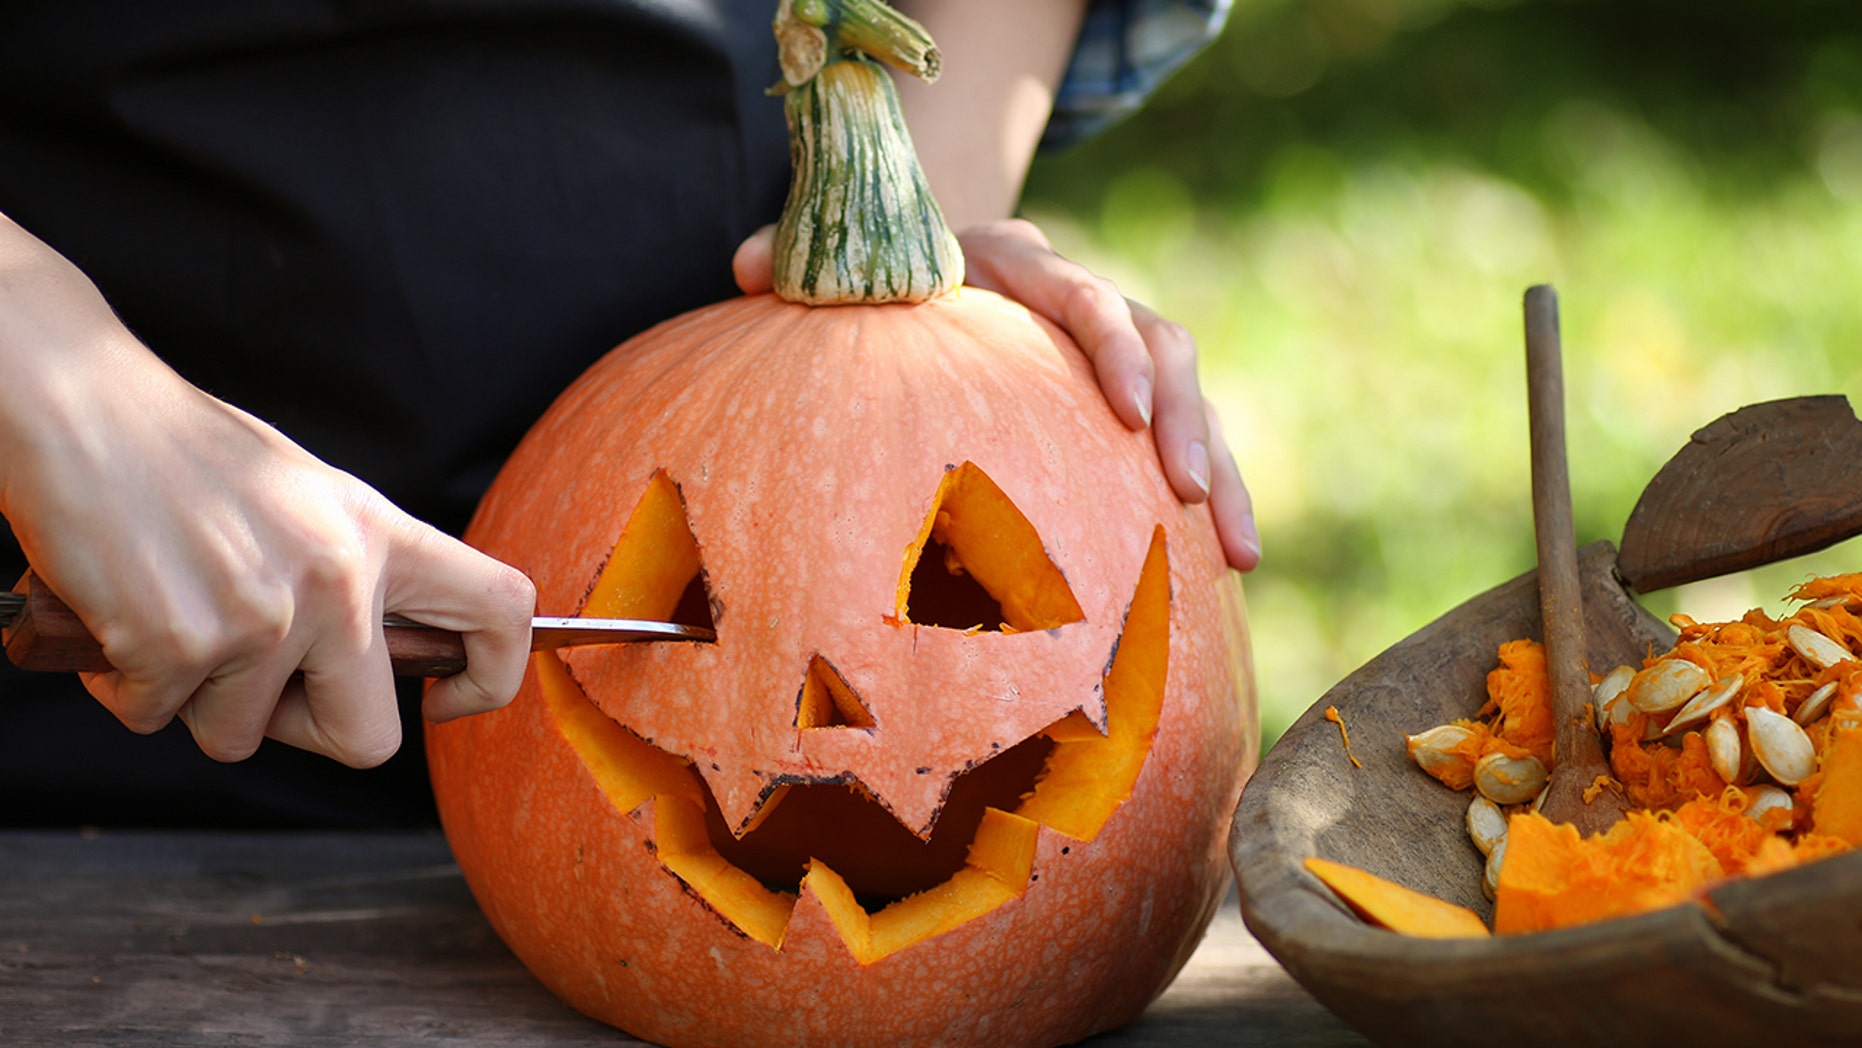 everything-you-need-to-know-about-cooking-with-pumpkins-good-food